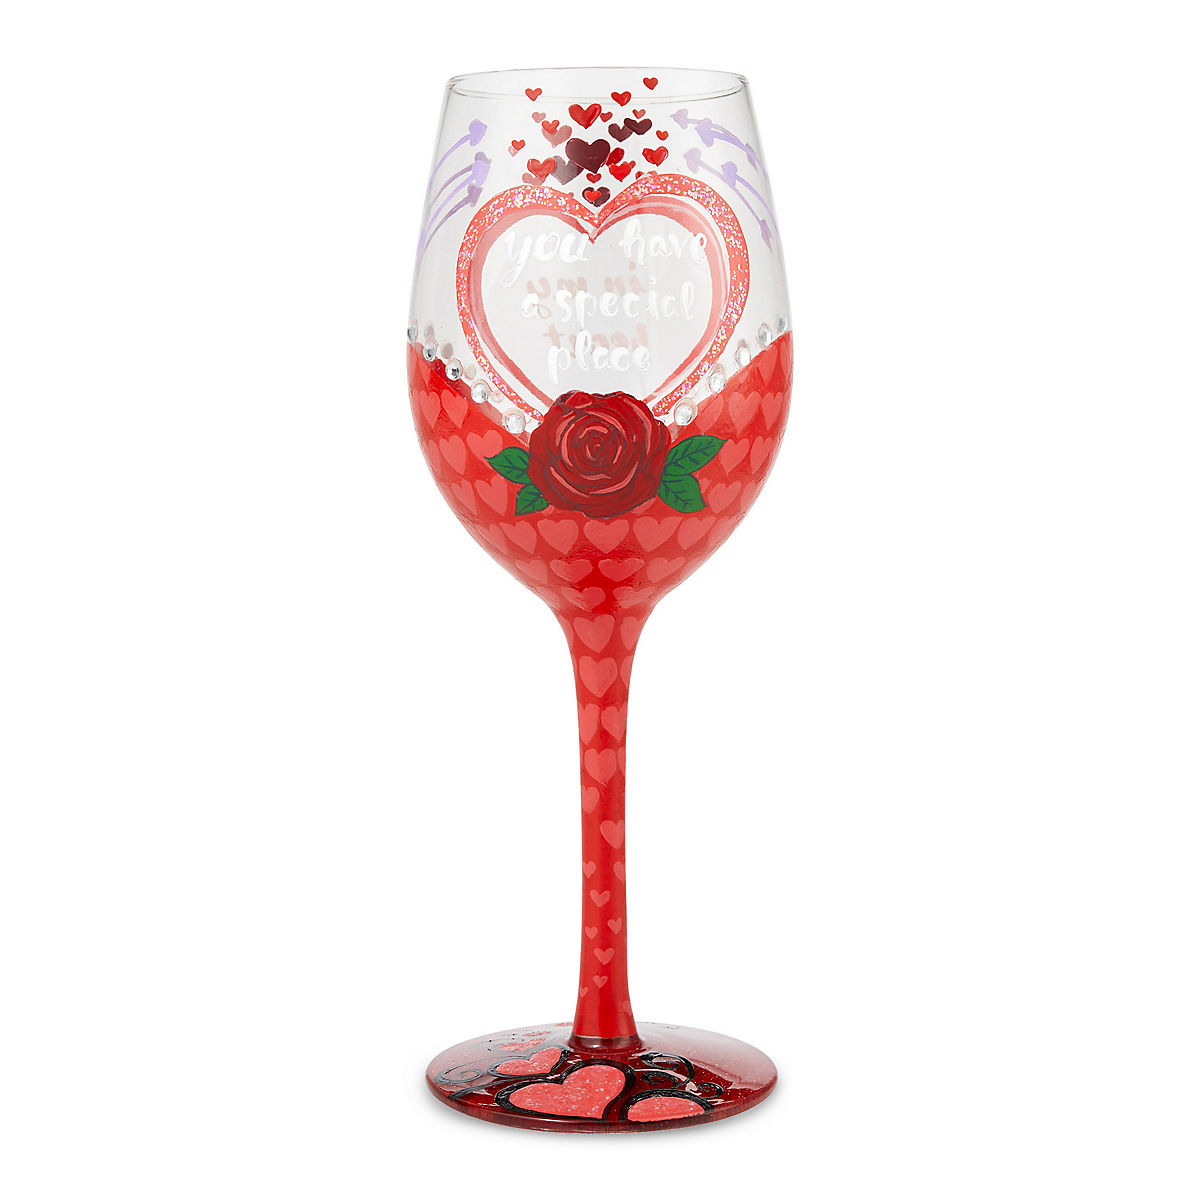 FREE P&P Individual ' Special Nan ' Wine Glass Charm comes in a Gift Card 